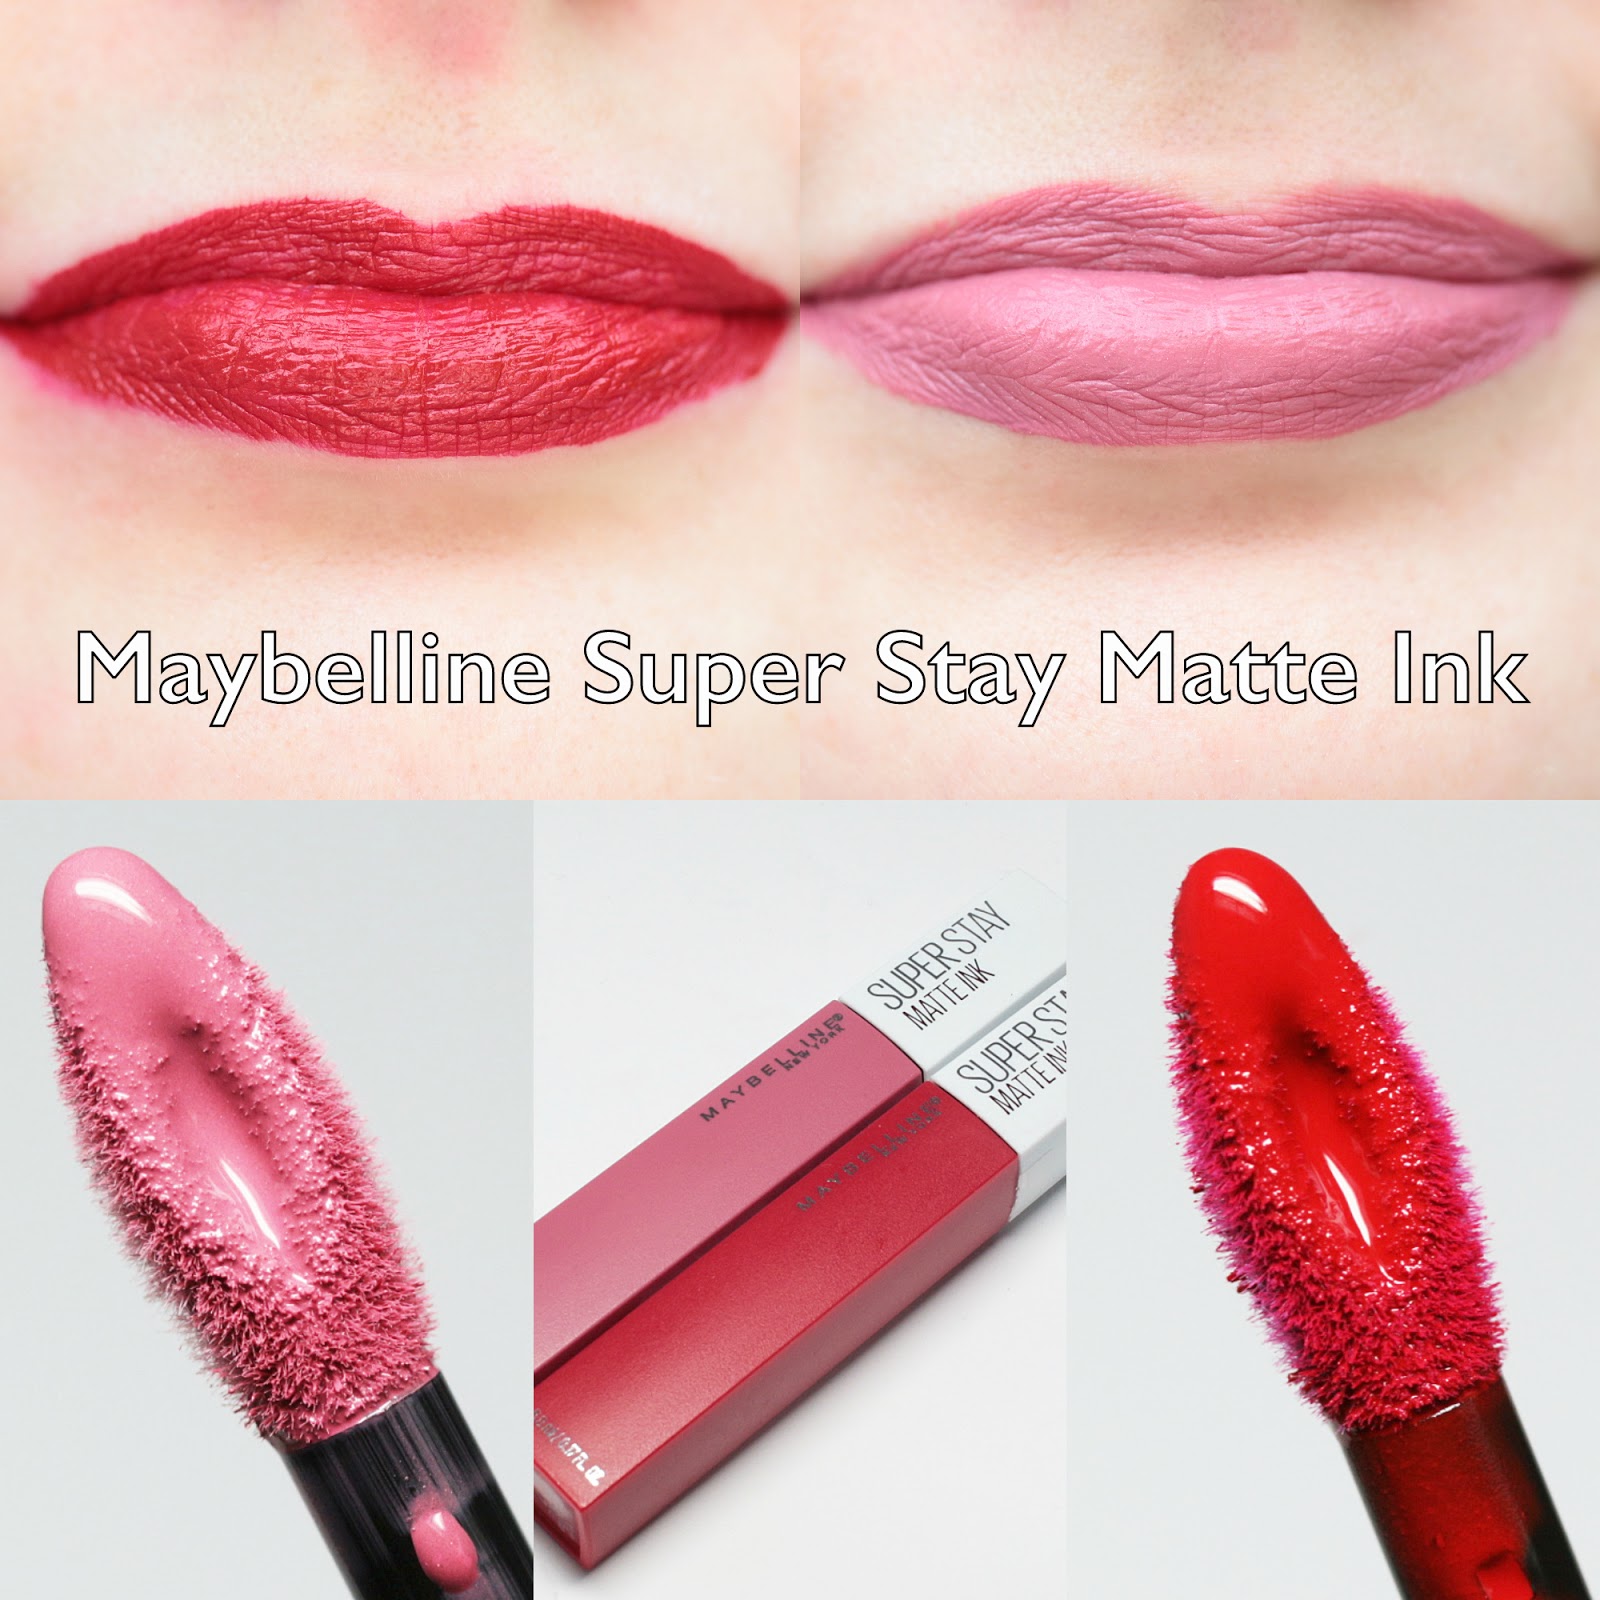 Maori beweeglijkheid Poort The Polished Hippy: Maybelline Super Stay Matte Ink Liquid Lipstick Swatches  and Review